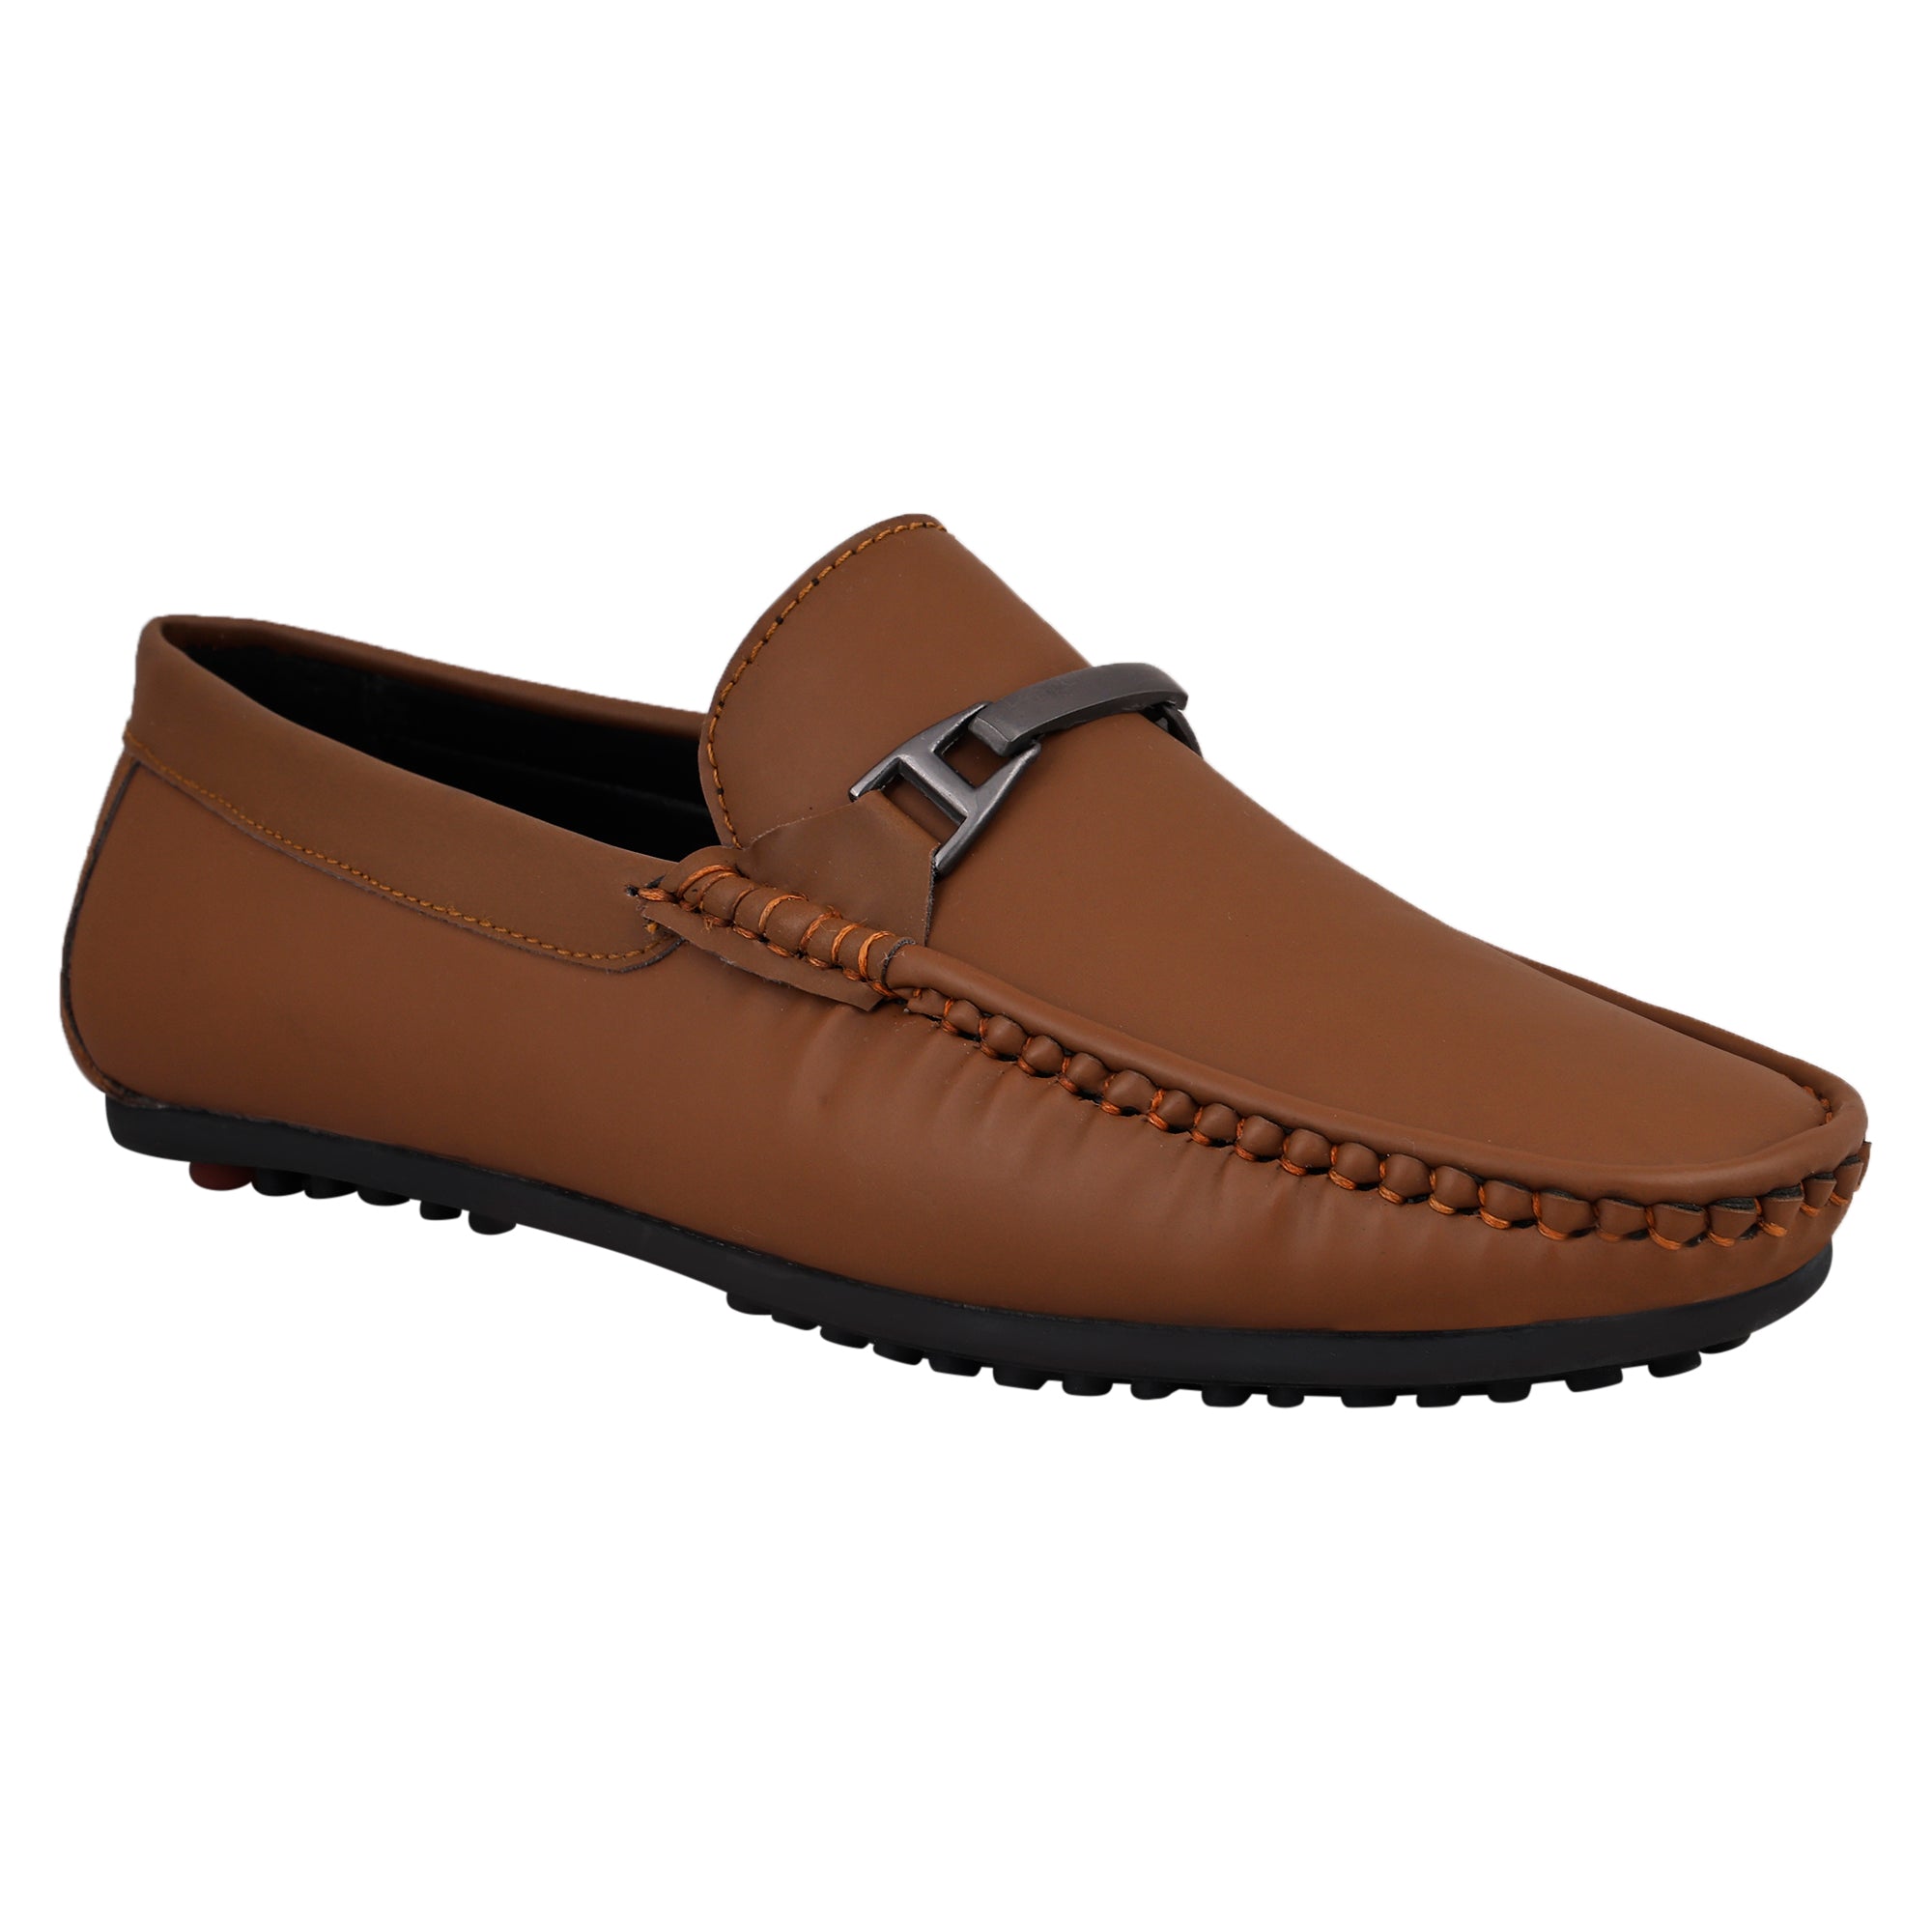 LB 39B Men's Brunette Tan Slip On Style Loafer Most Comfortable Doctor Insole With Wrinkle Free Fox Leather Loafers